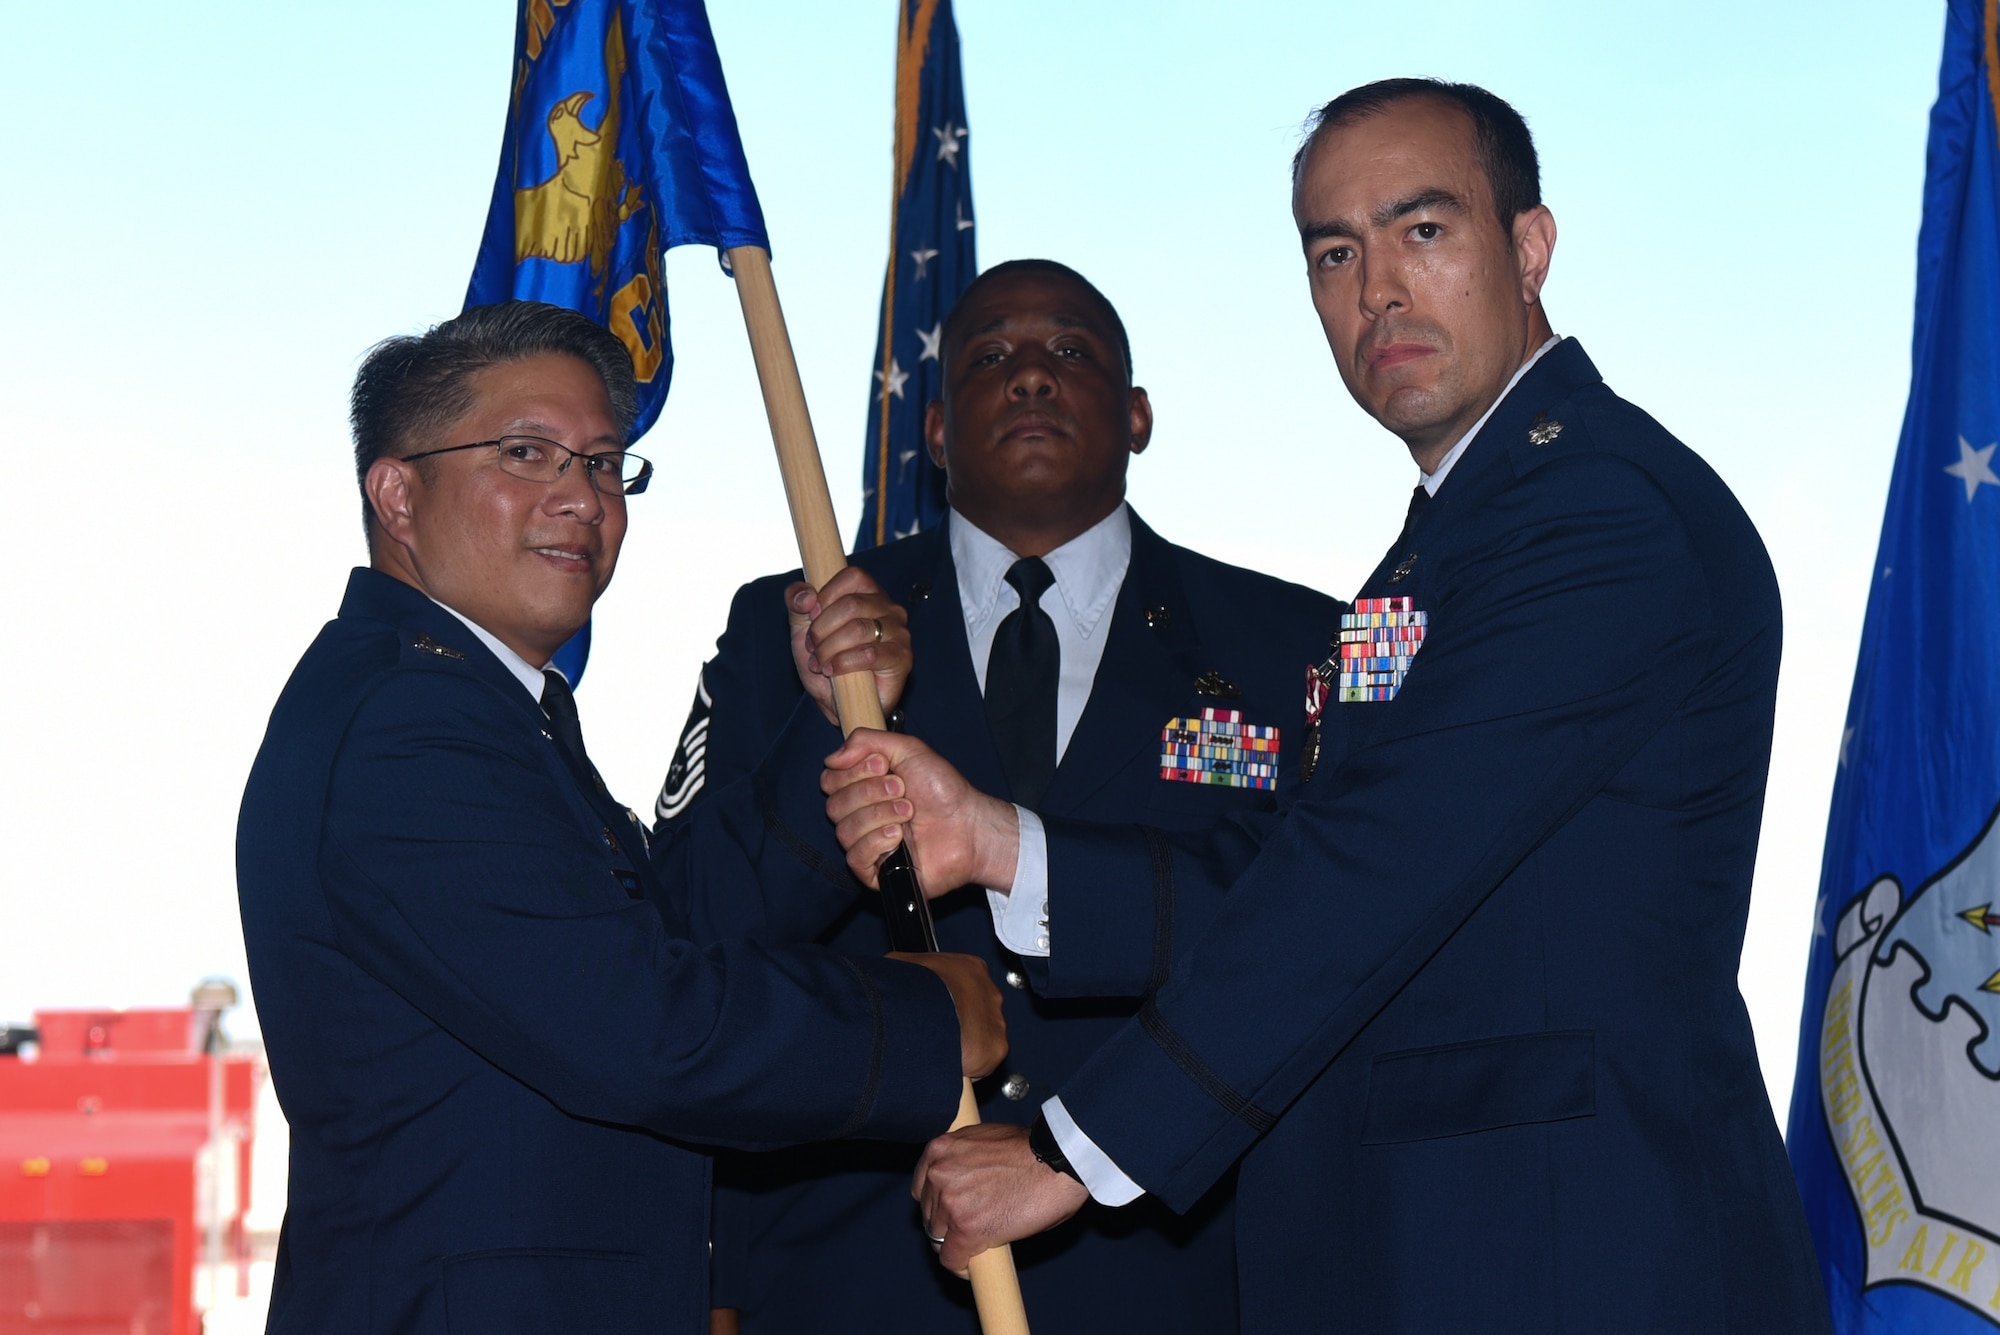 Lt. Col. Daniel Craig, the outgoing 22nd Civil Engineering Squadron commander, passes Col. Anthony Gamboa, 22nd Mission Support Group commander, the 22nd CES guidon during a change of command ceremony July 16, 2019, at McConnell Air Force Base, Kan. Craig served as the 22nd CES commander for two years before relinquishing command. (U.S. Air Force photo by Airman 1st Class Alexi Myrick)